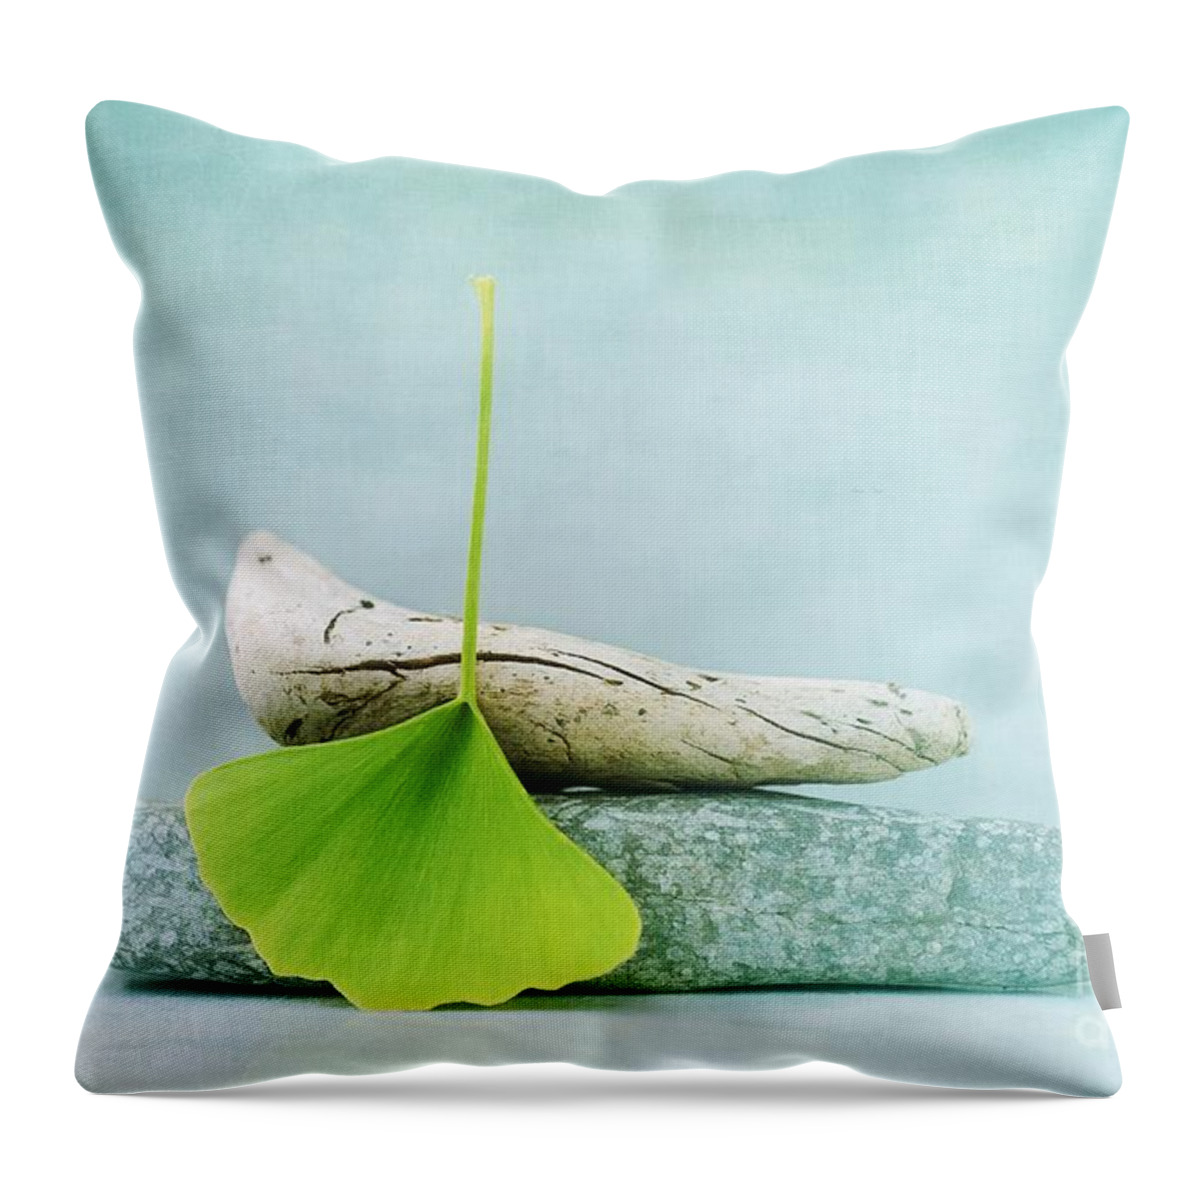 Leaf Throw Pillow featuring the photograph Driftwood Stones And A Gingko Leaf by Priska Wettstein